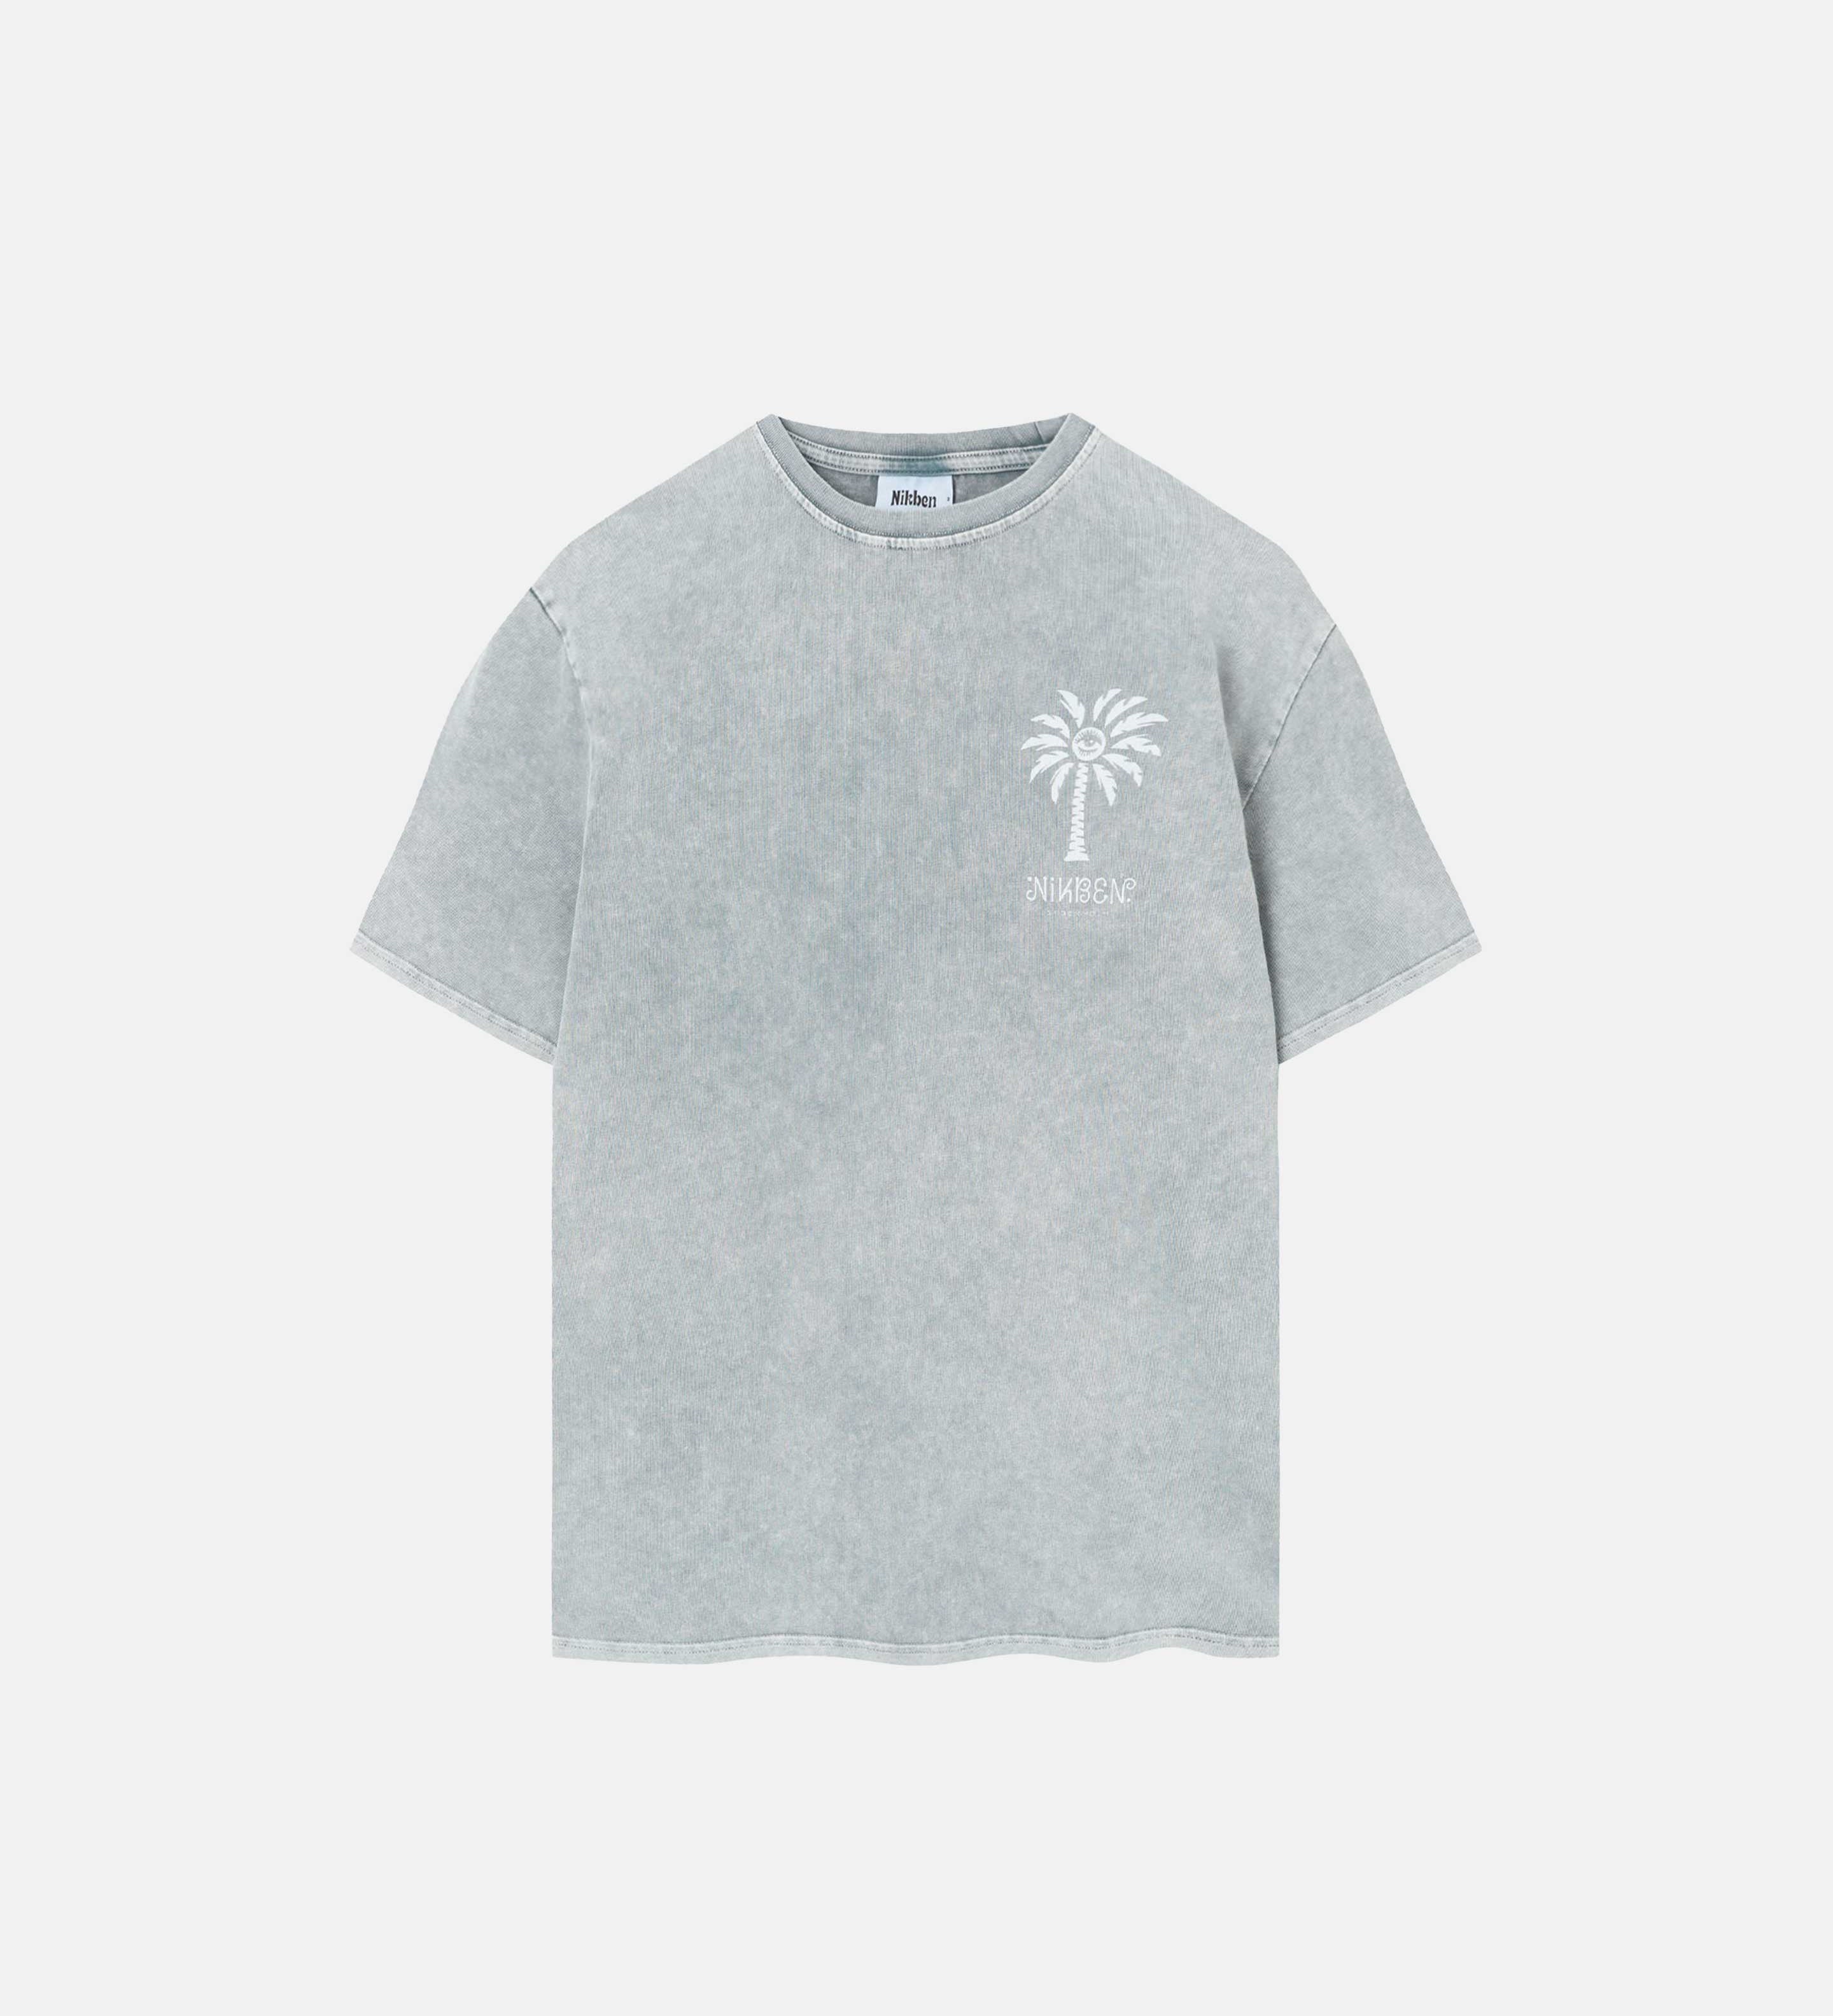 Grey t-shirt with a white palm print on the chest.